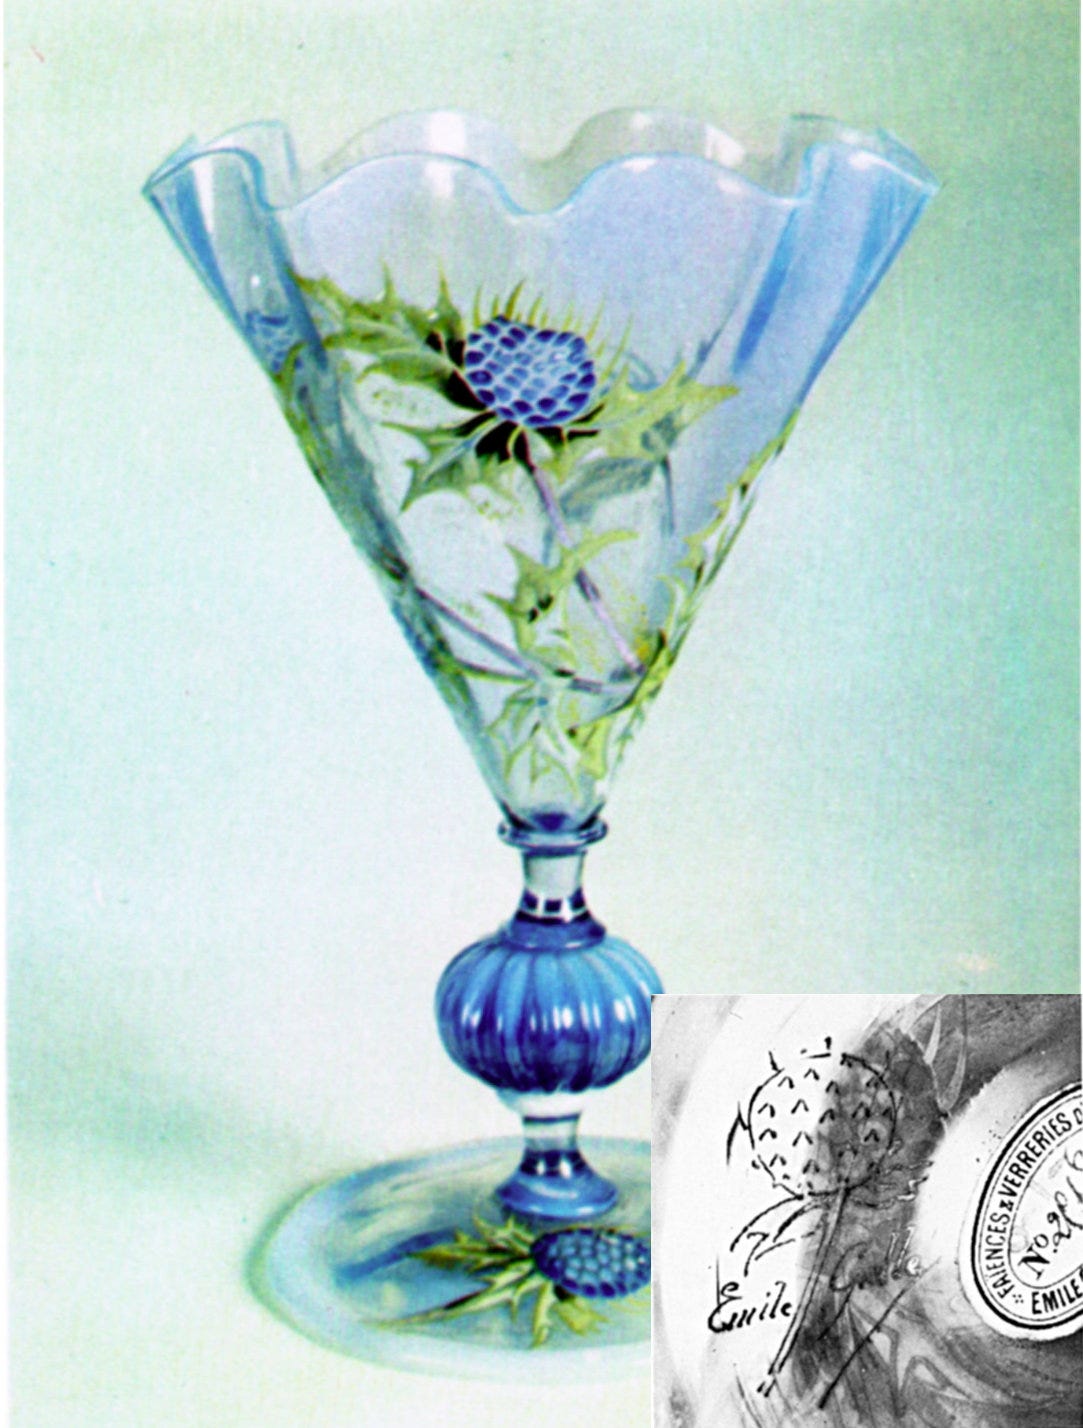 Enamelled thistles vase and signature with the E1 label, Funke-Kaiser collection, Köln, cat. 160, p. 241.